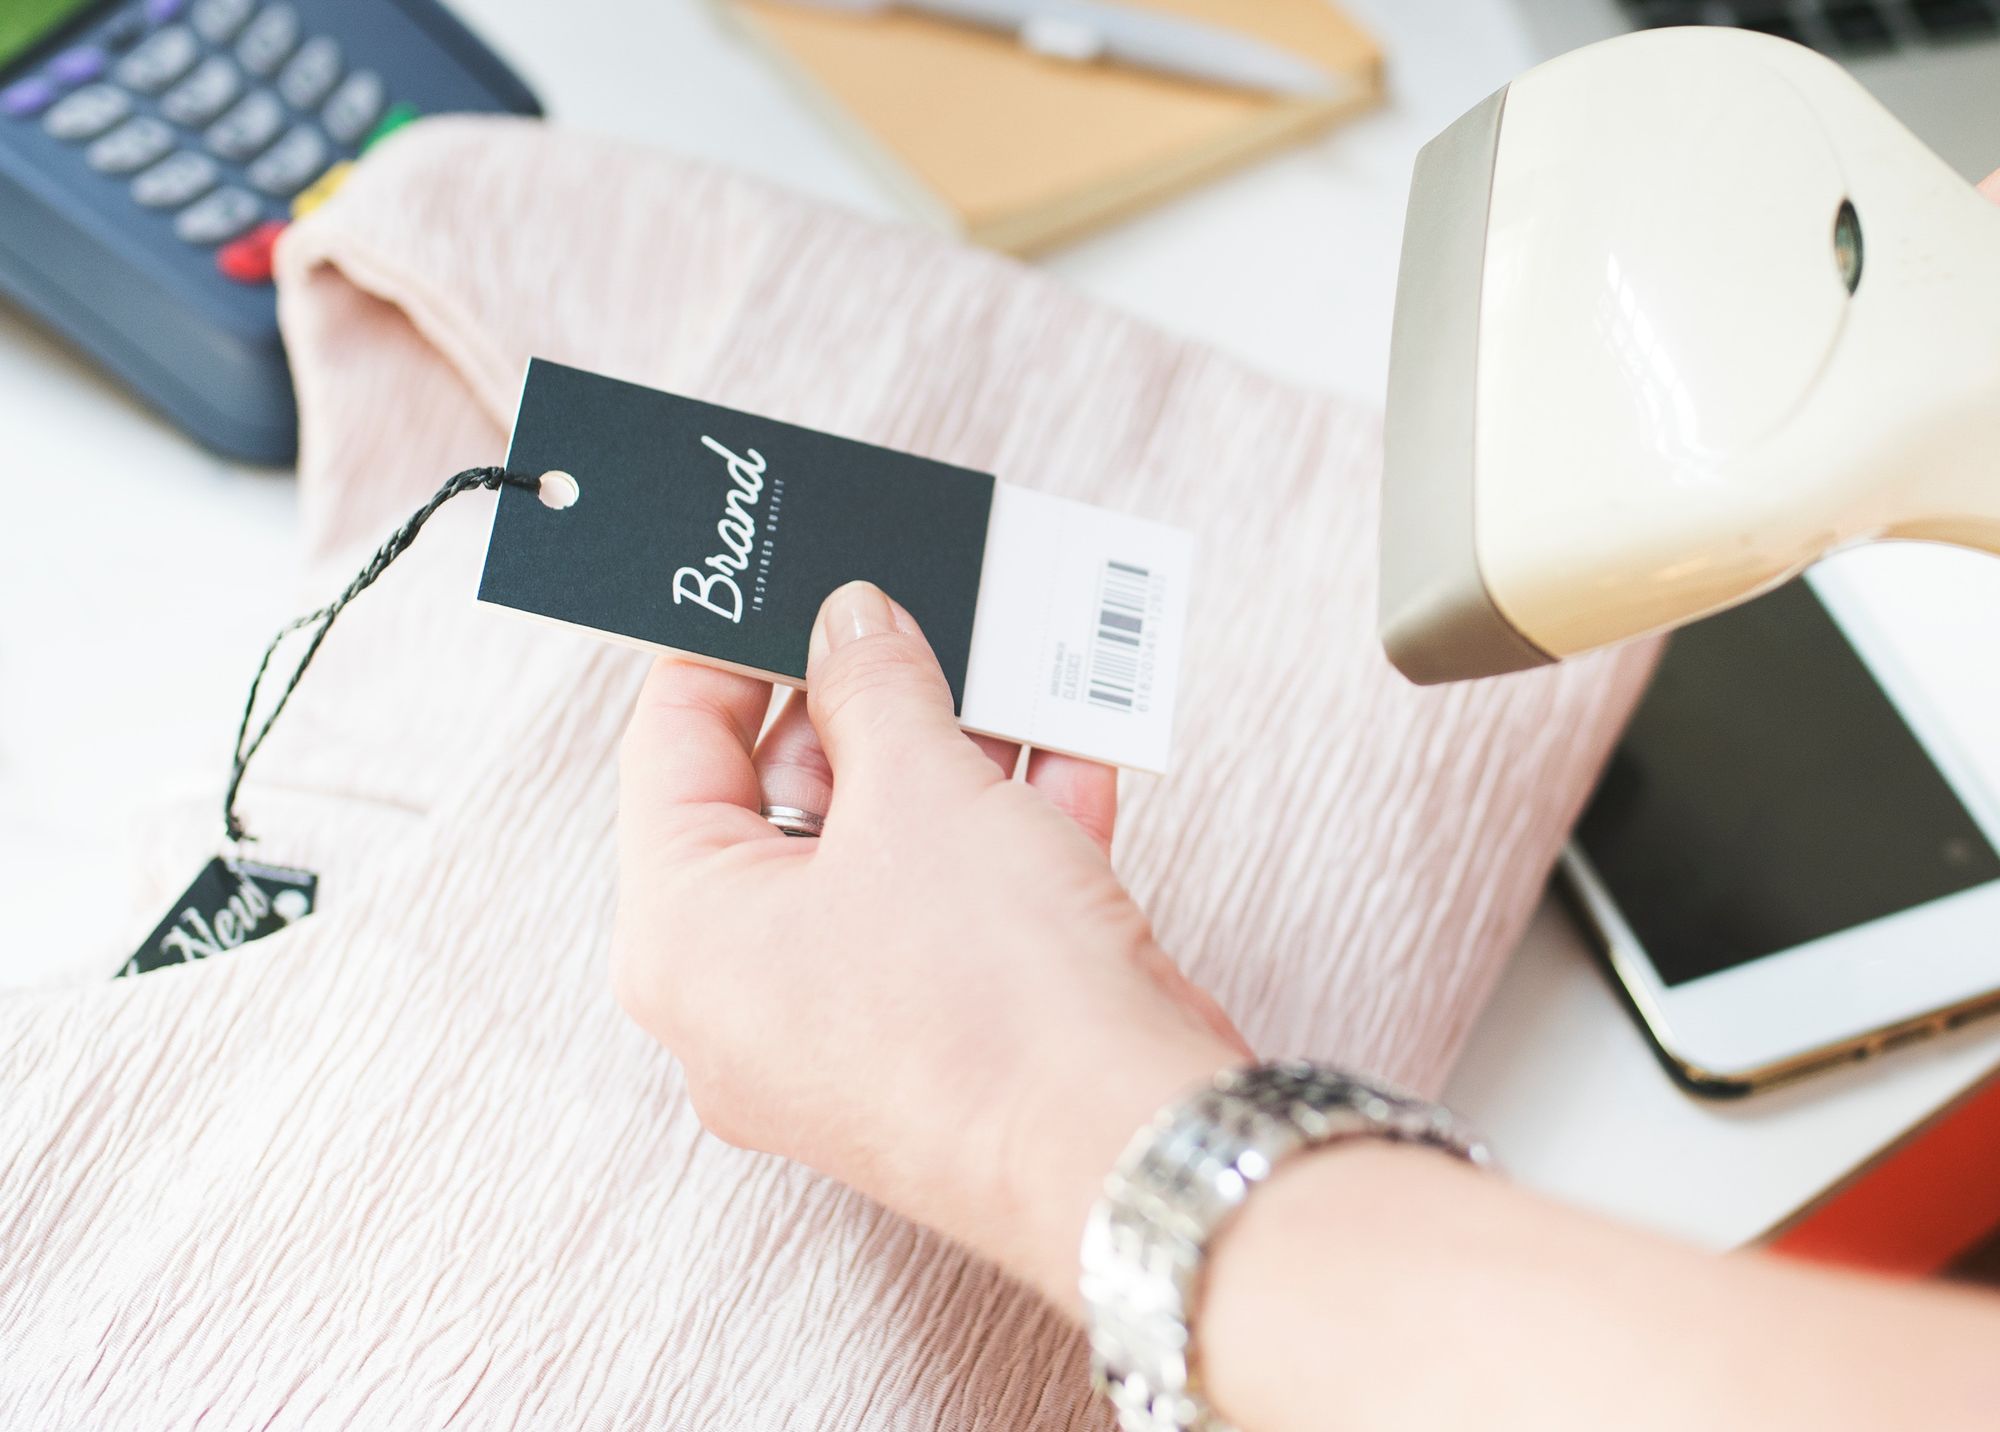 Challenges of tech innovation in fashion retail